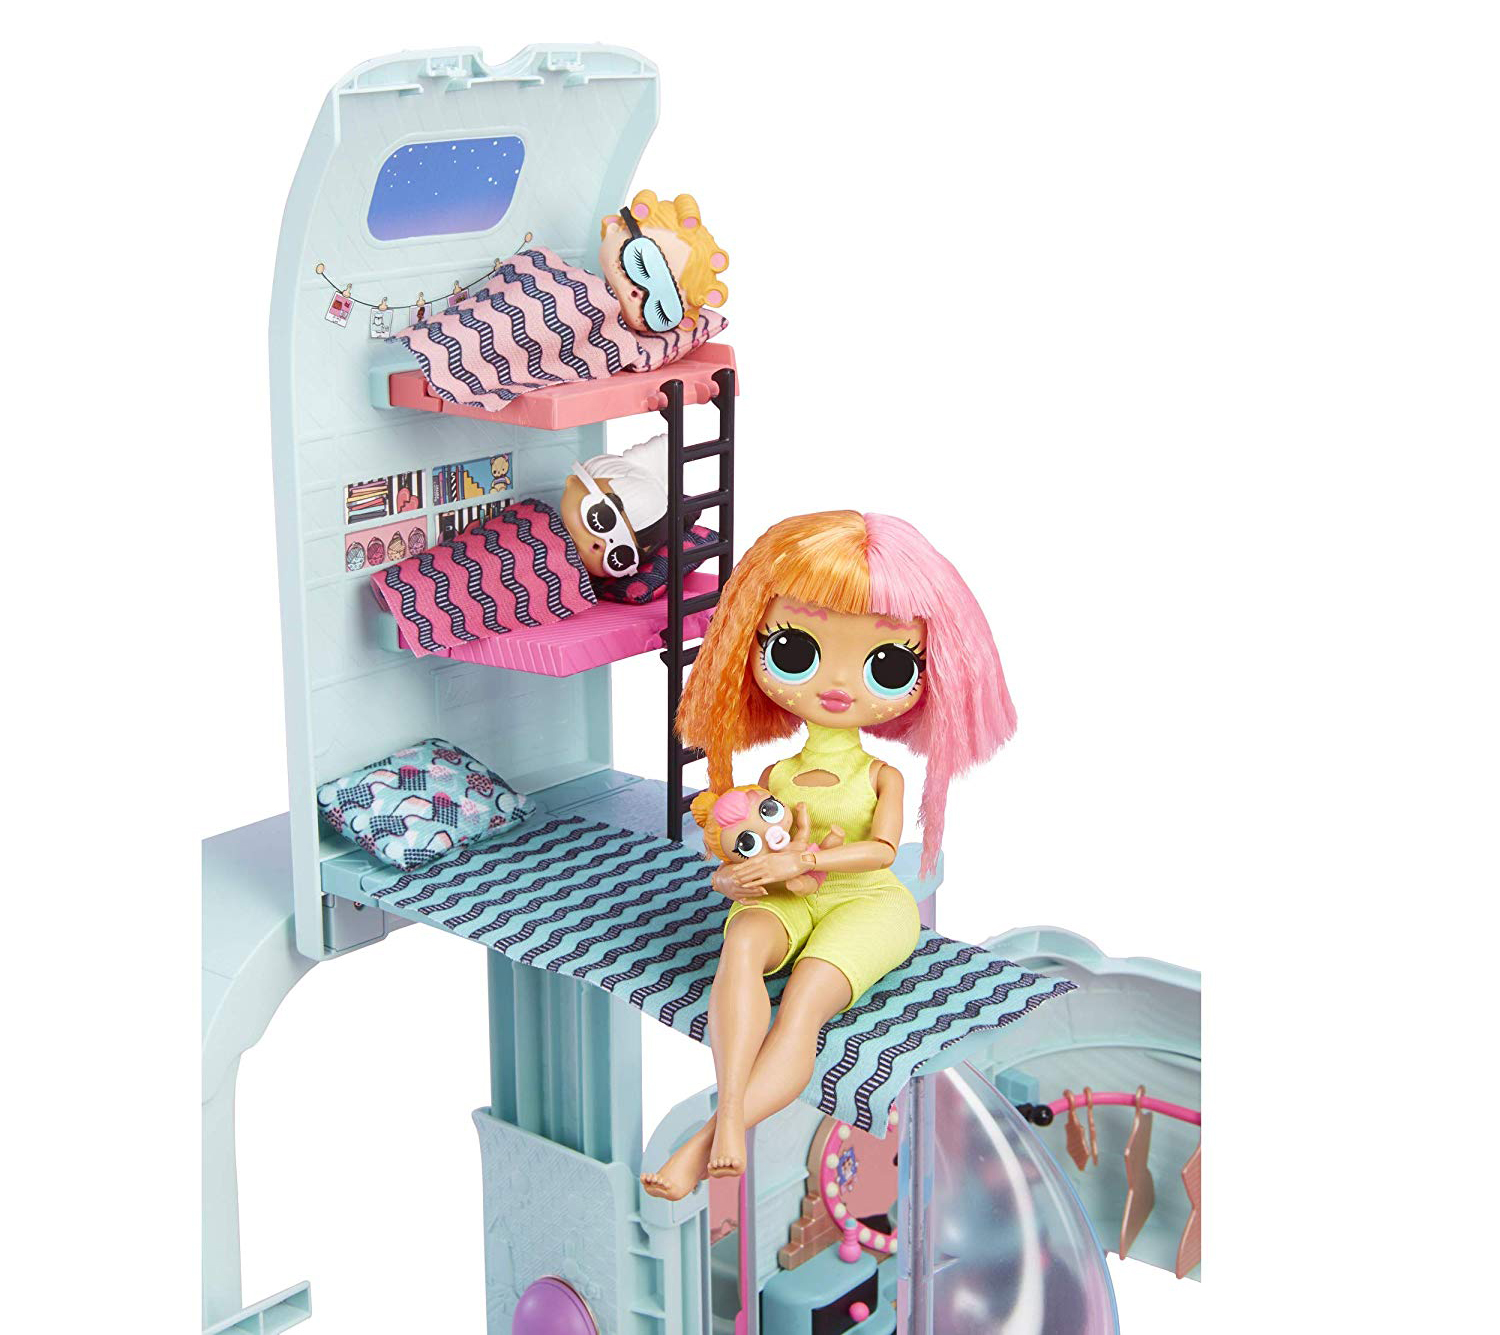 LOL Surprise OMG Glamper Fashion Camper Doll Playset with 55+